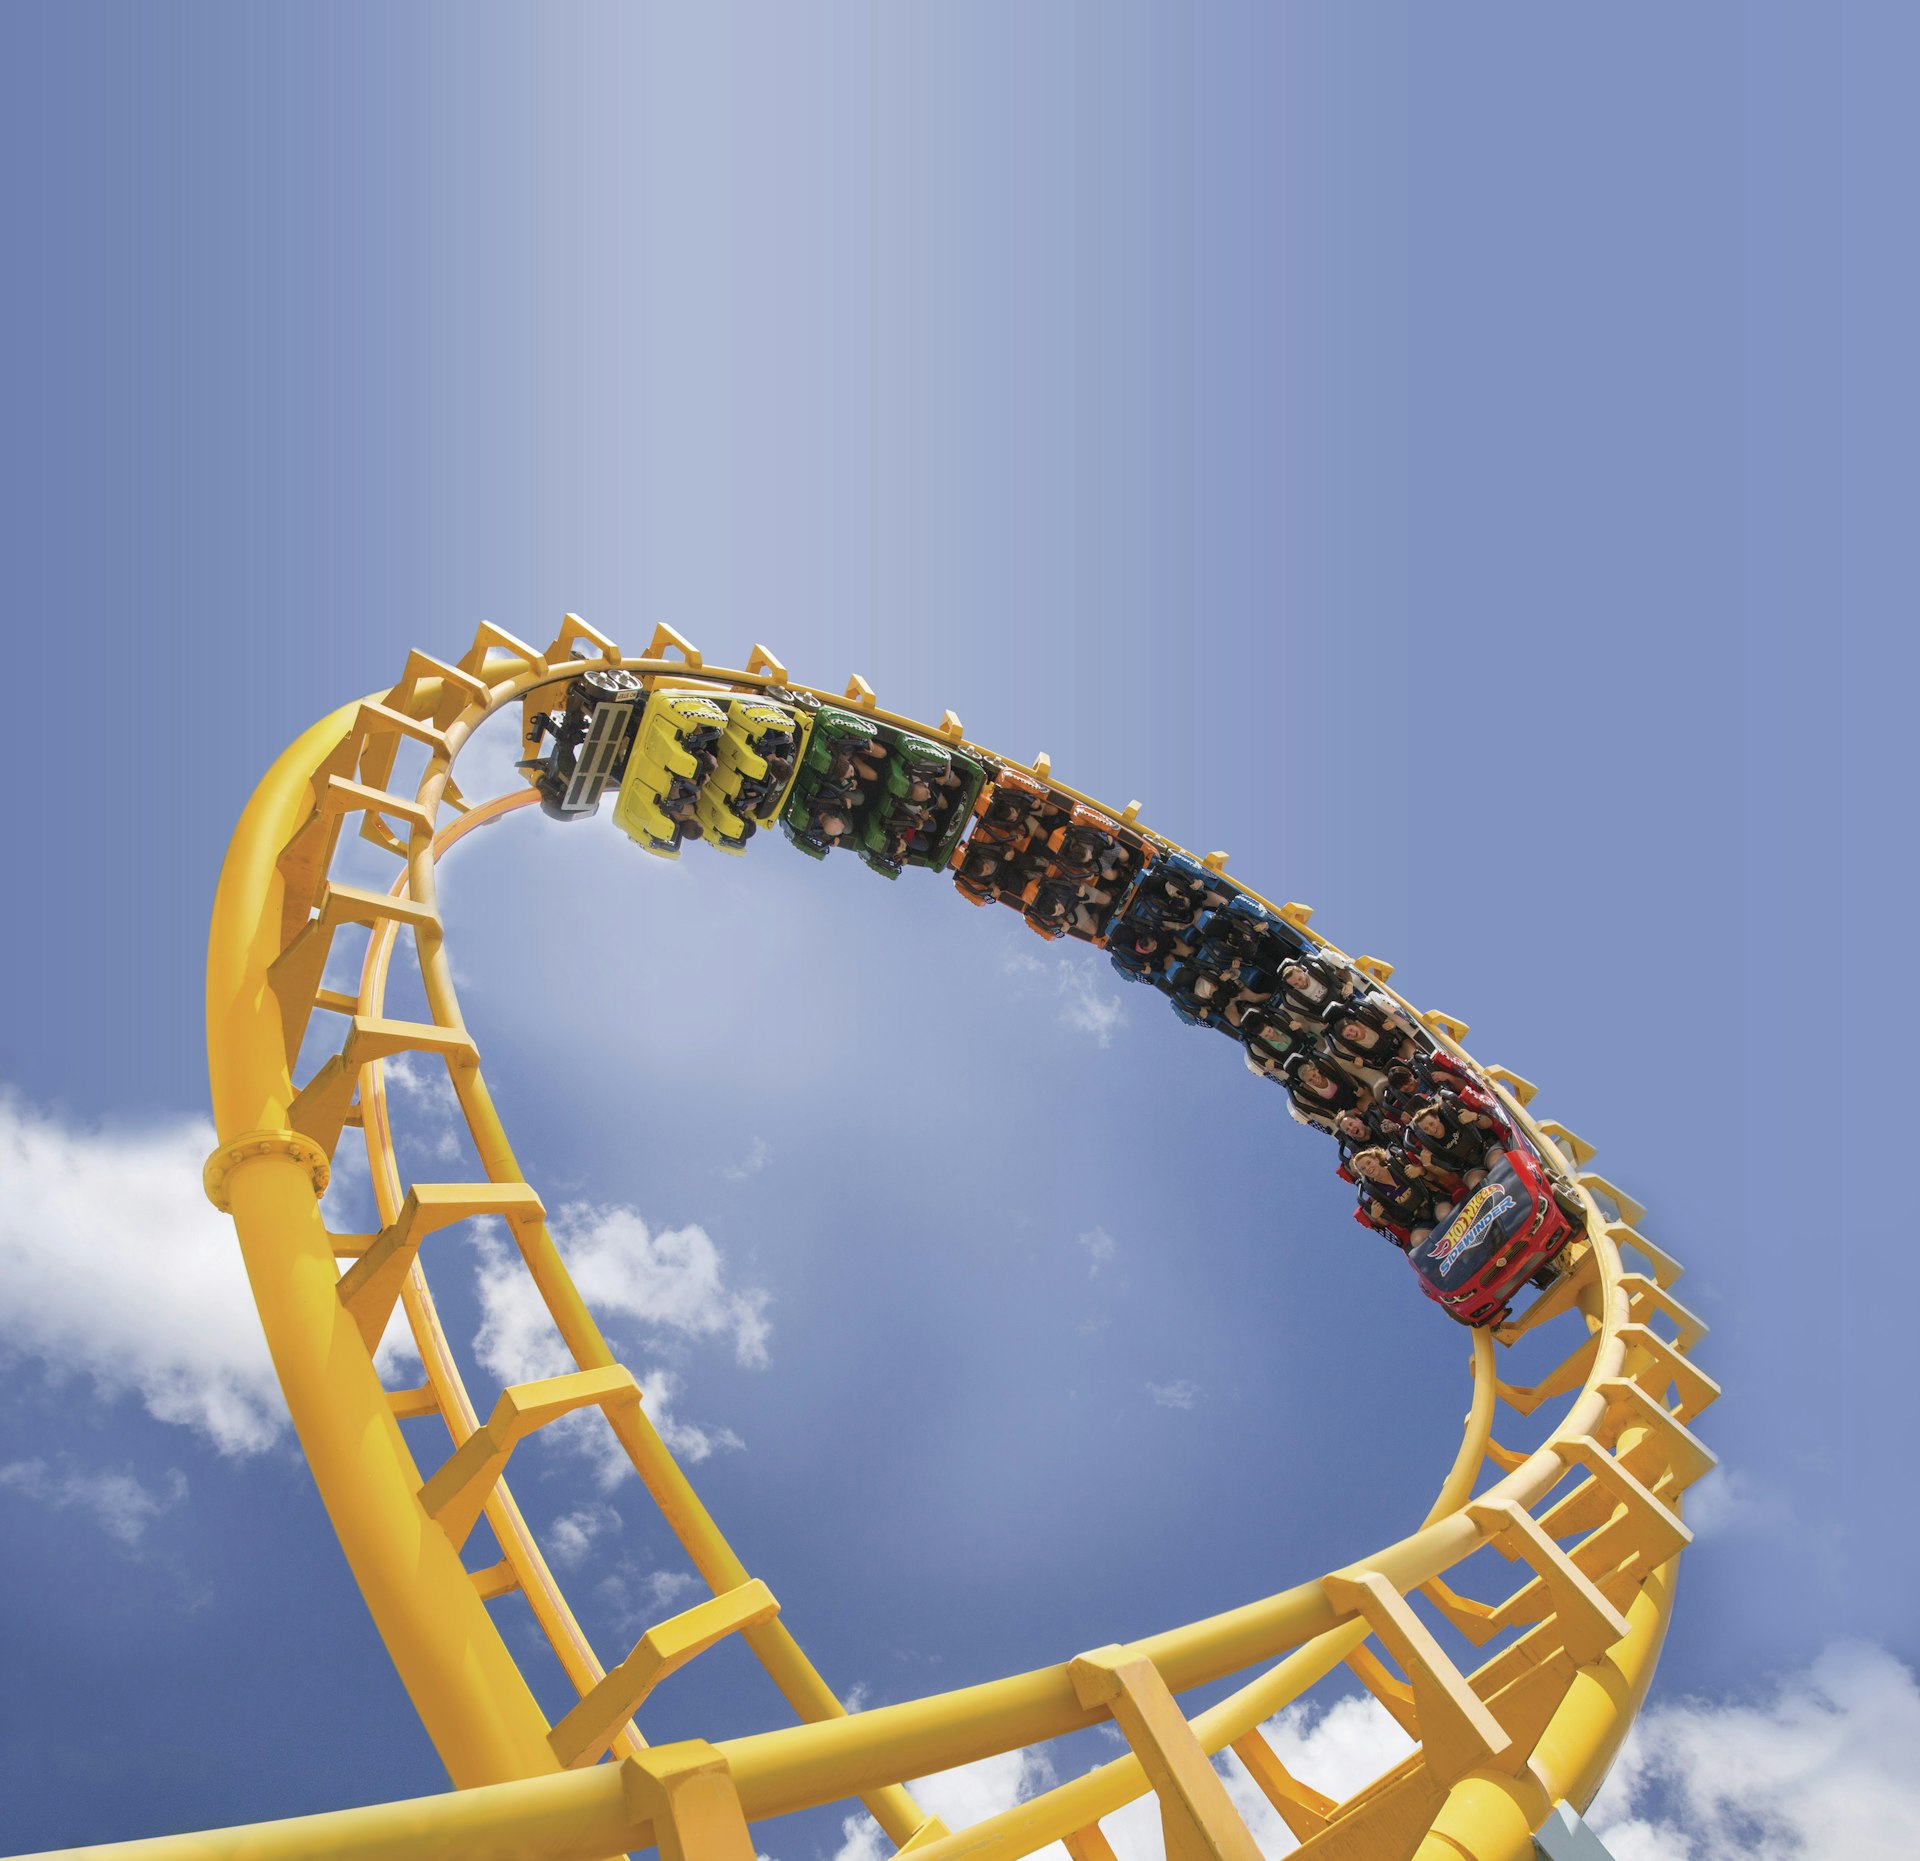 Features - Cyclone, Dreamworld